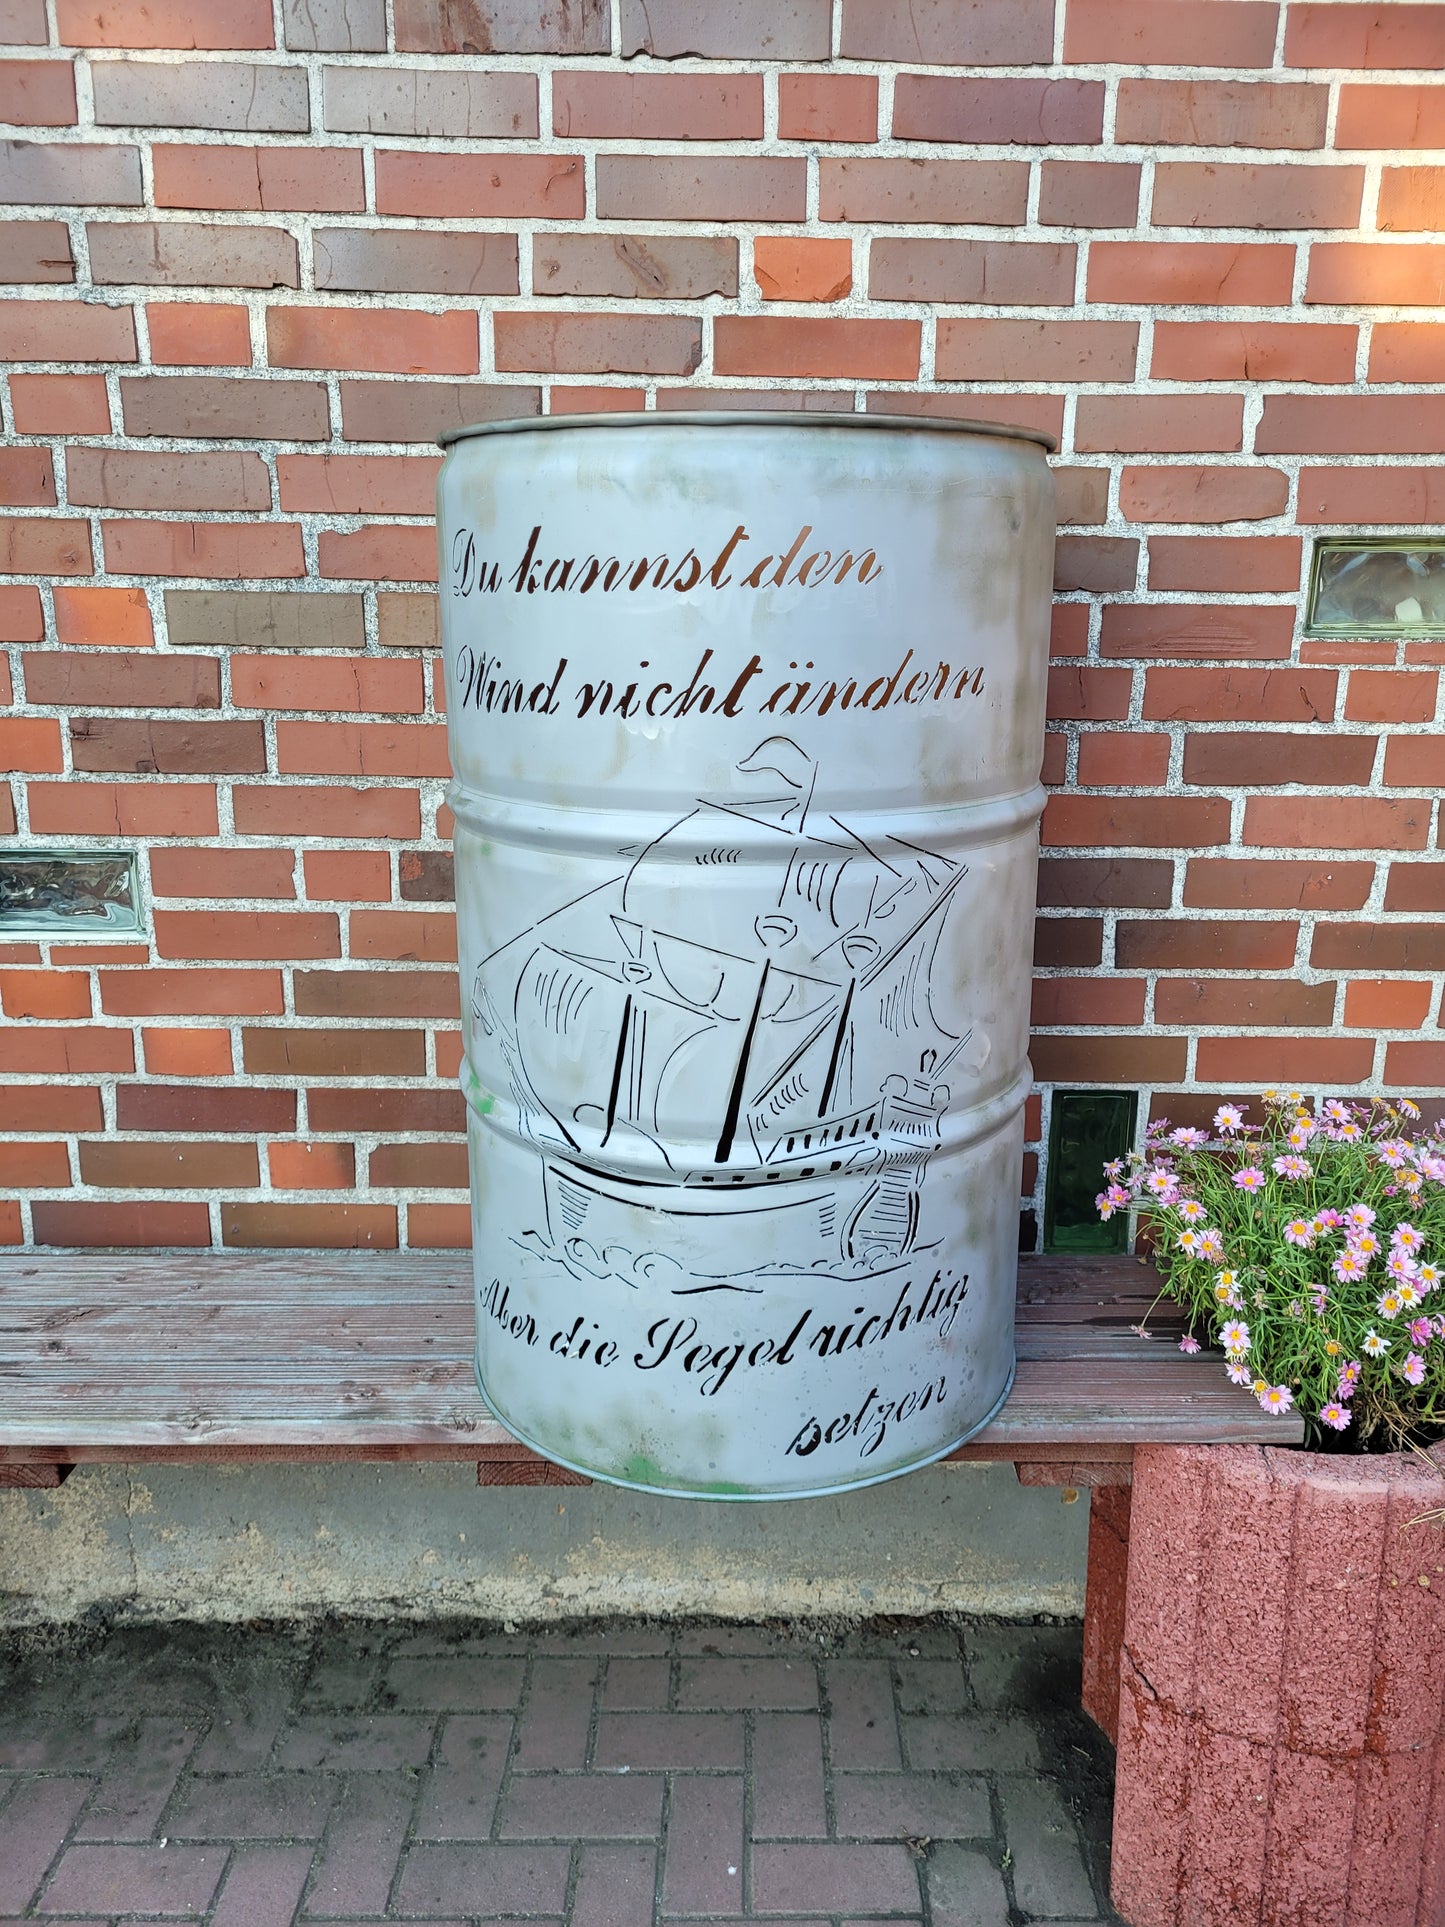 Fire barrel with a ship motif and a lettering